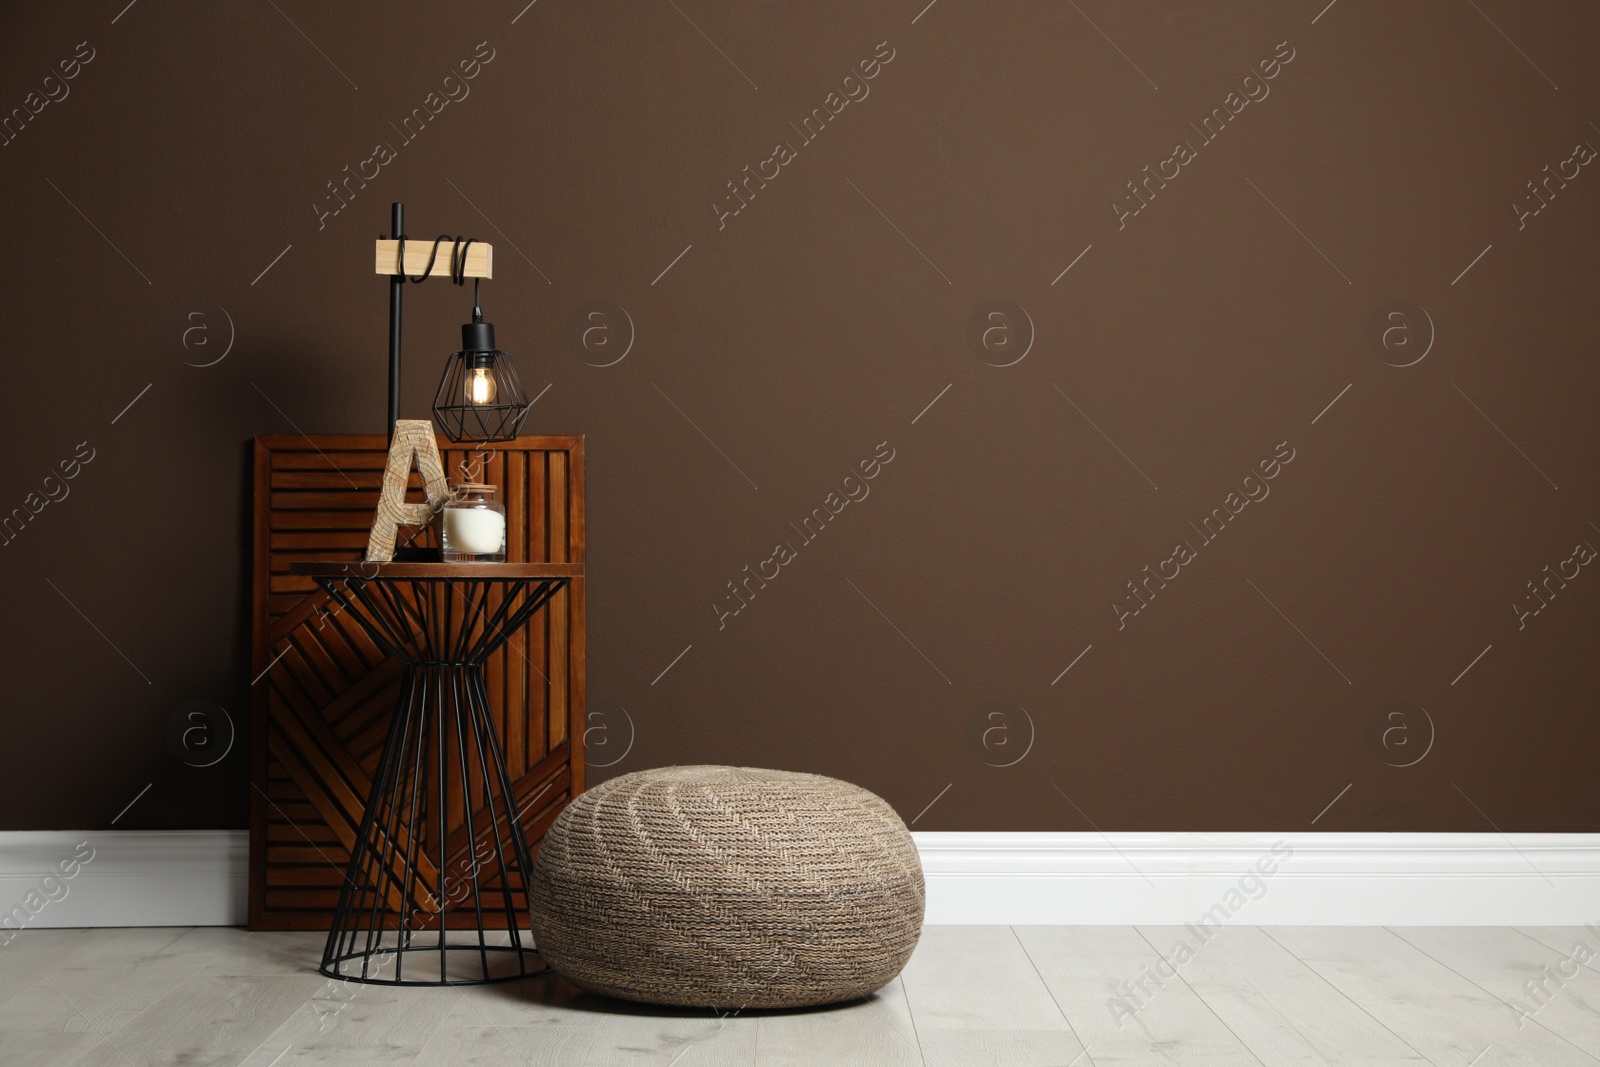 Photo of Comfortable knitted pouf and table with decor elements near brown wall indoors, space for text. Interior design